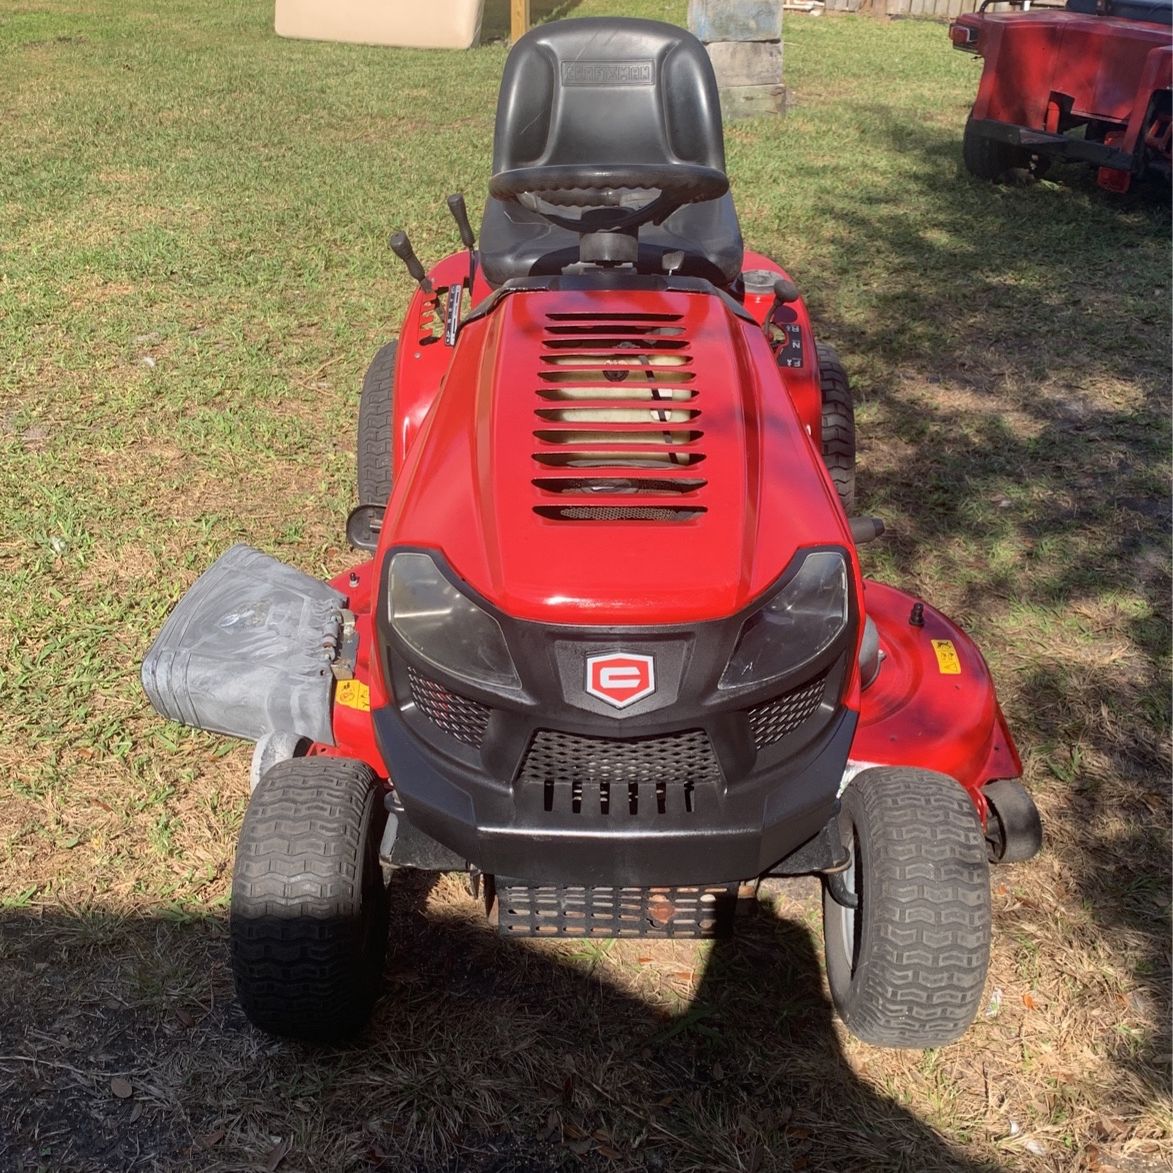 A craftsman T 1600 riding lawn tractor